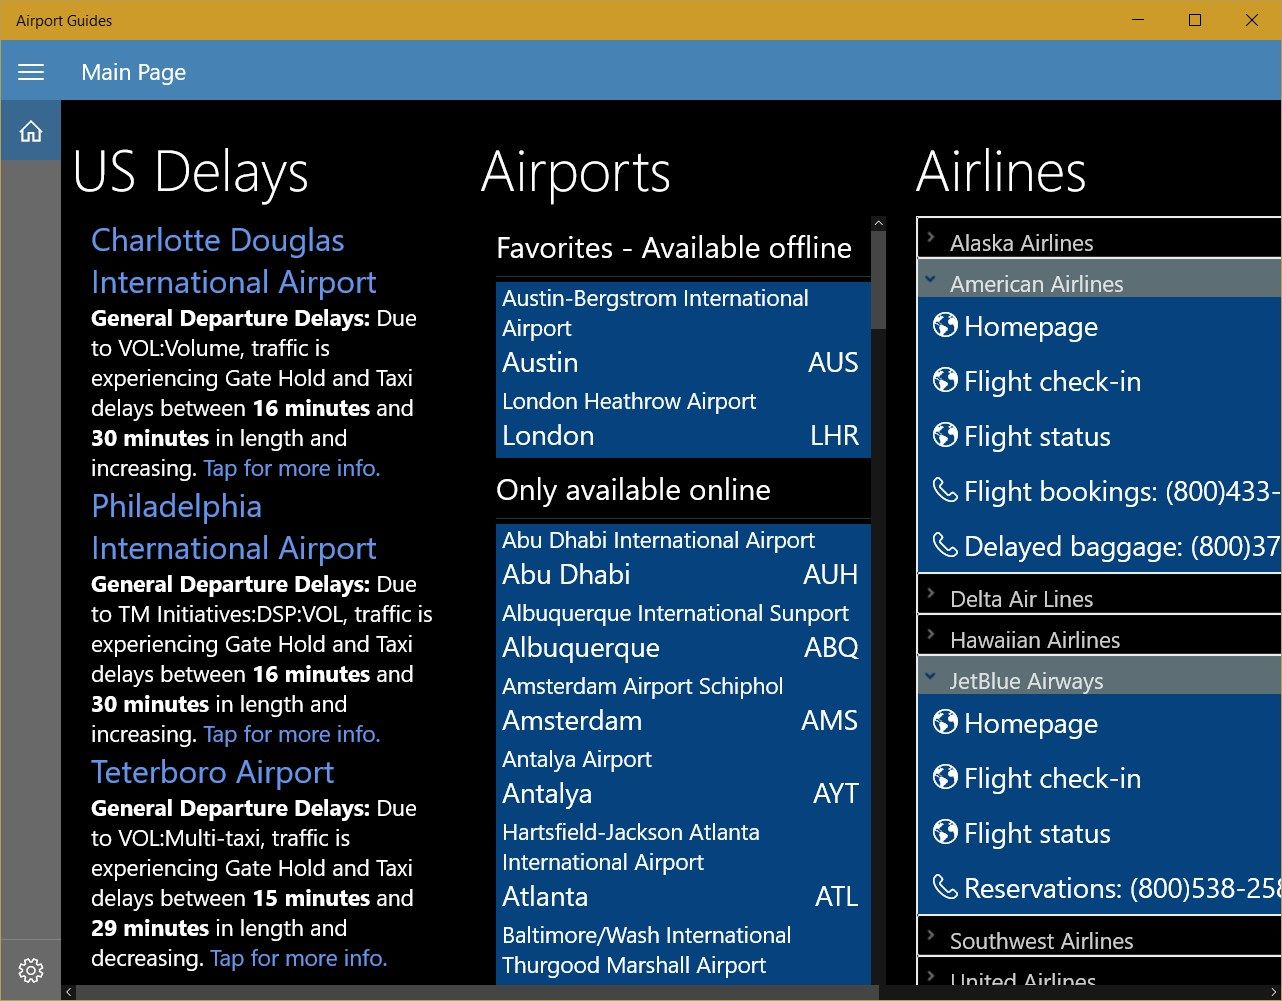 The app has information about more than 70 airports around the world!